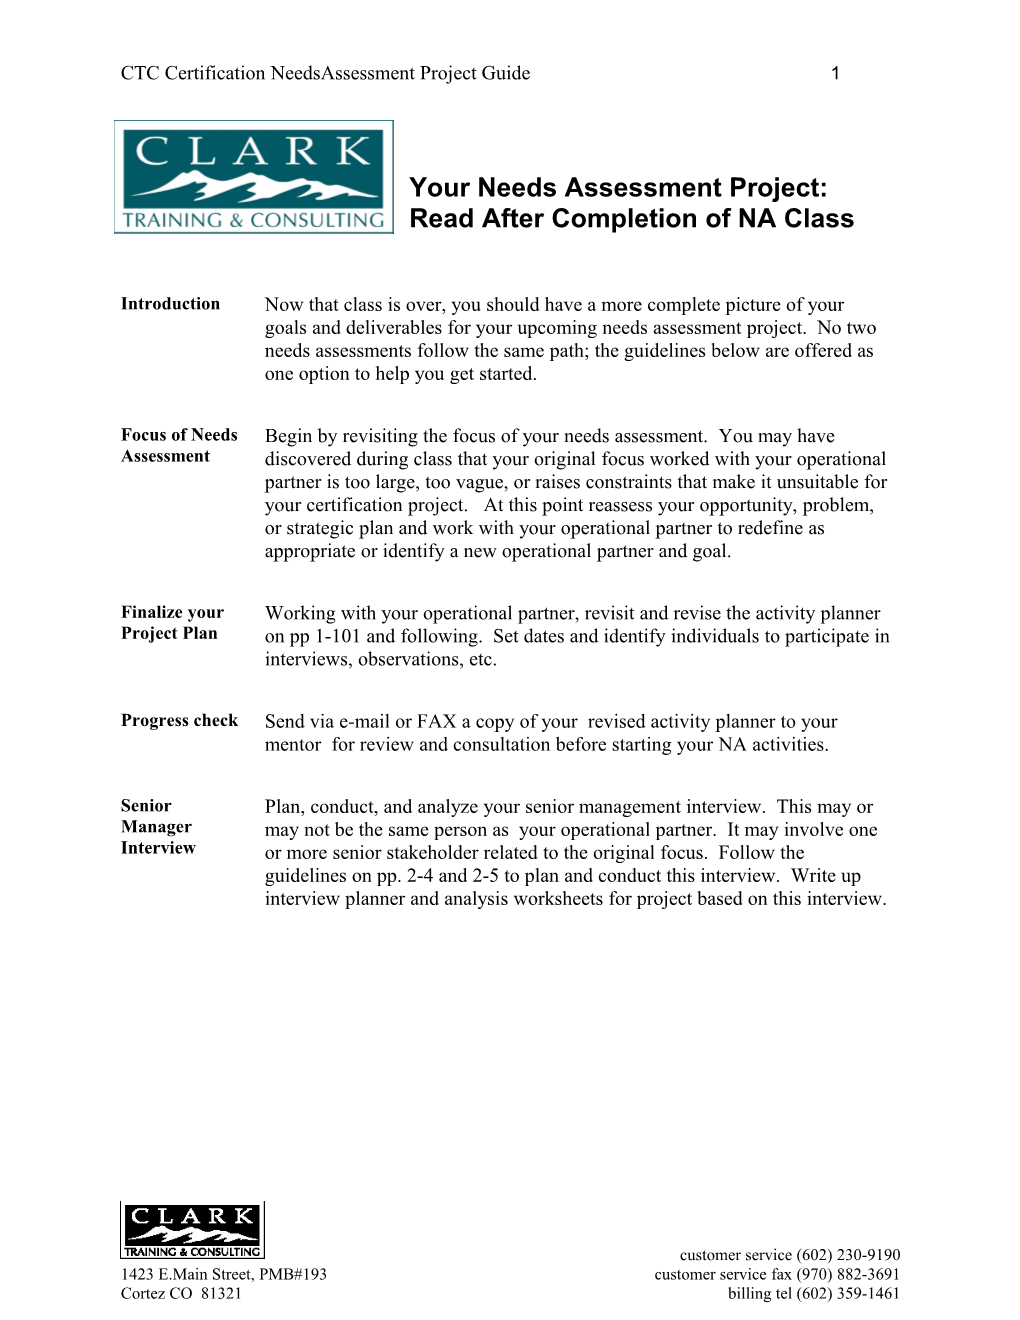 Completing Your Needs Assessment Project